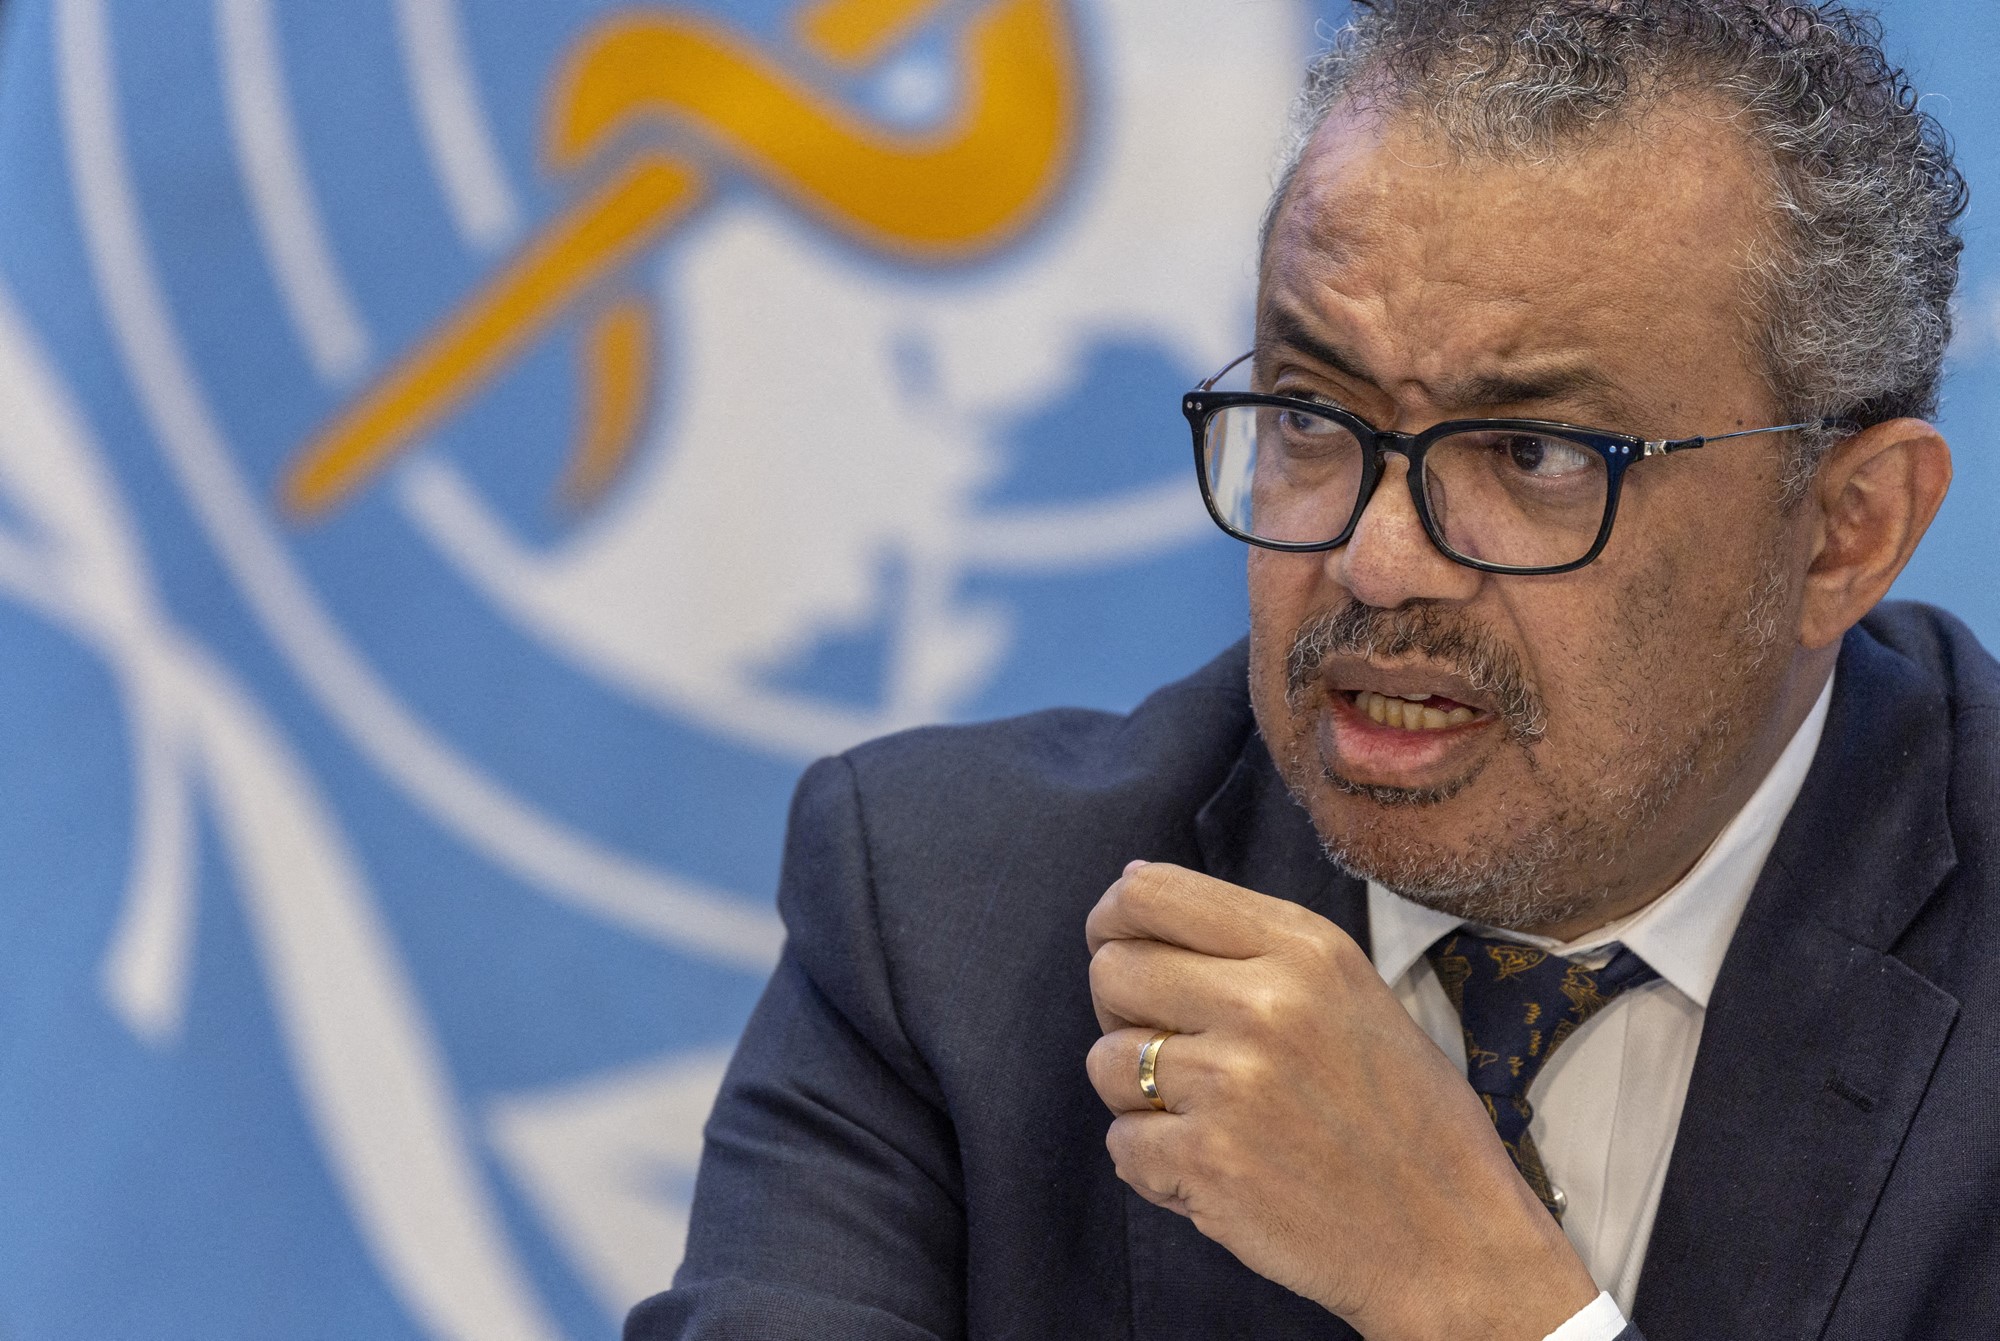 Dr Tedros at a news conference.